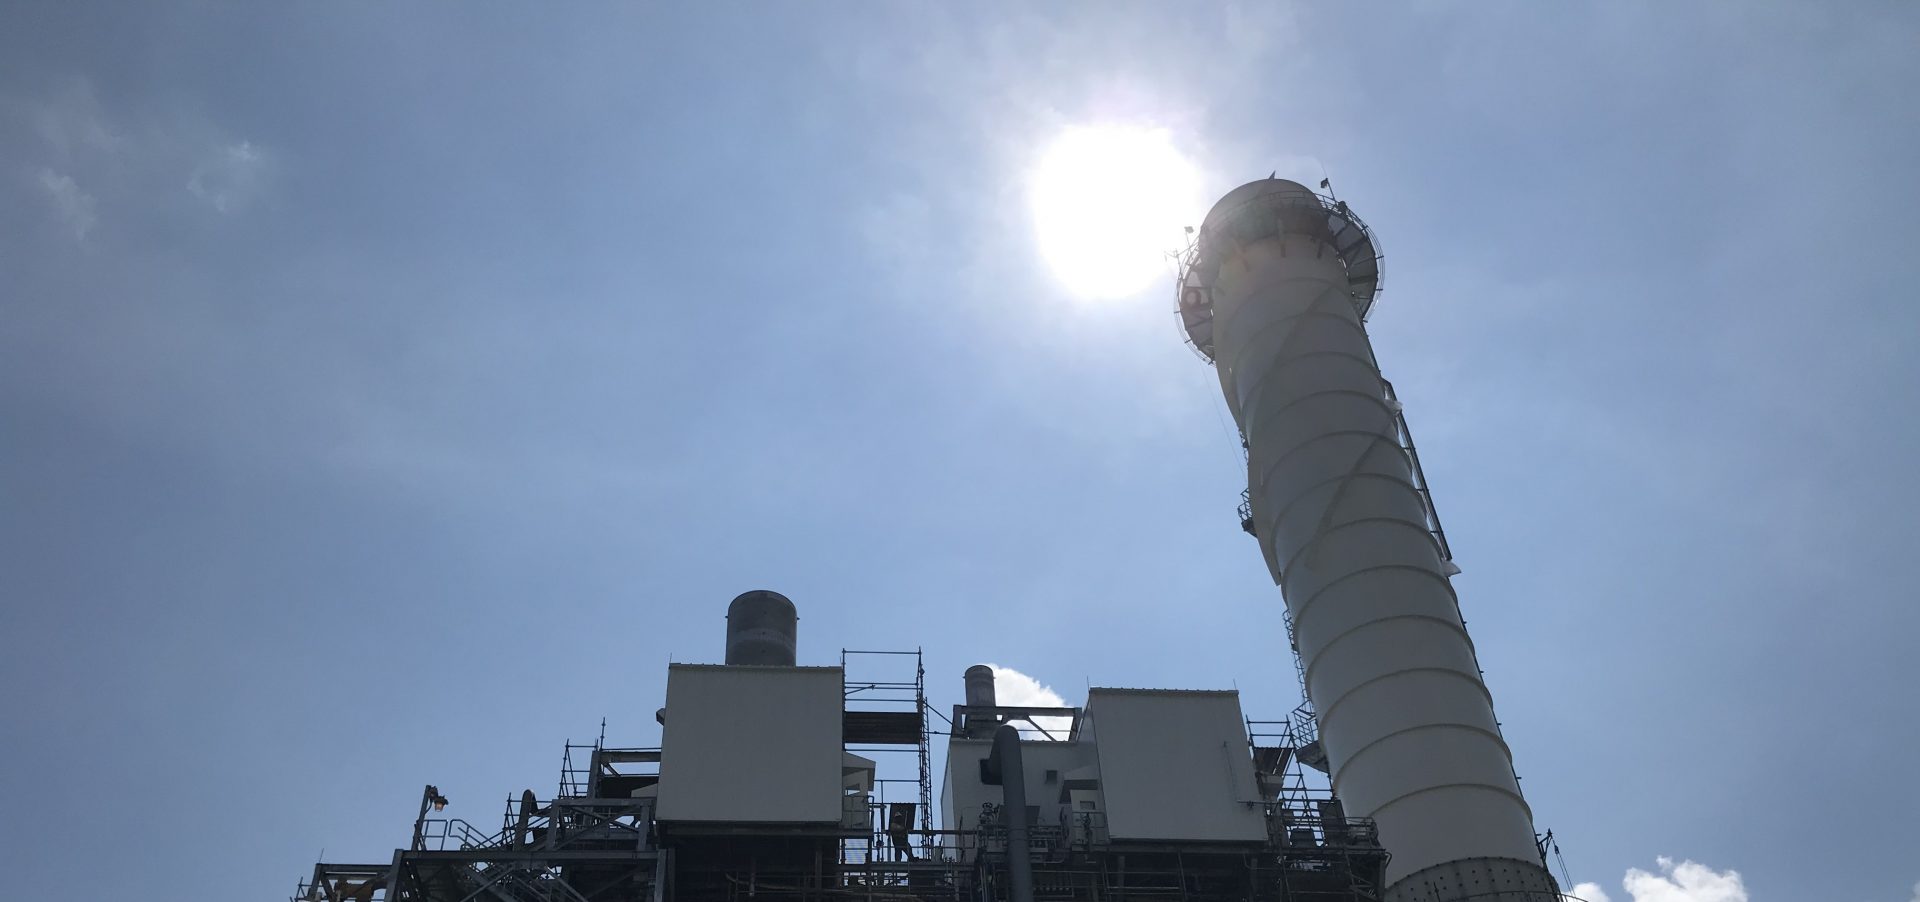 Calpine's York 2 Energy Center is an 828 megawatt combined-cycle natural gas-fired power plant in York County, Pa.